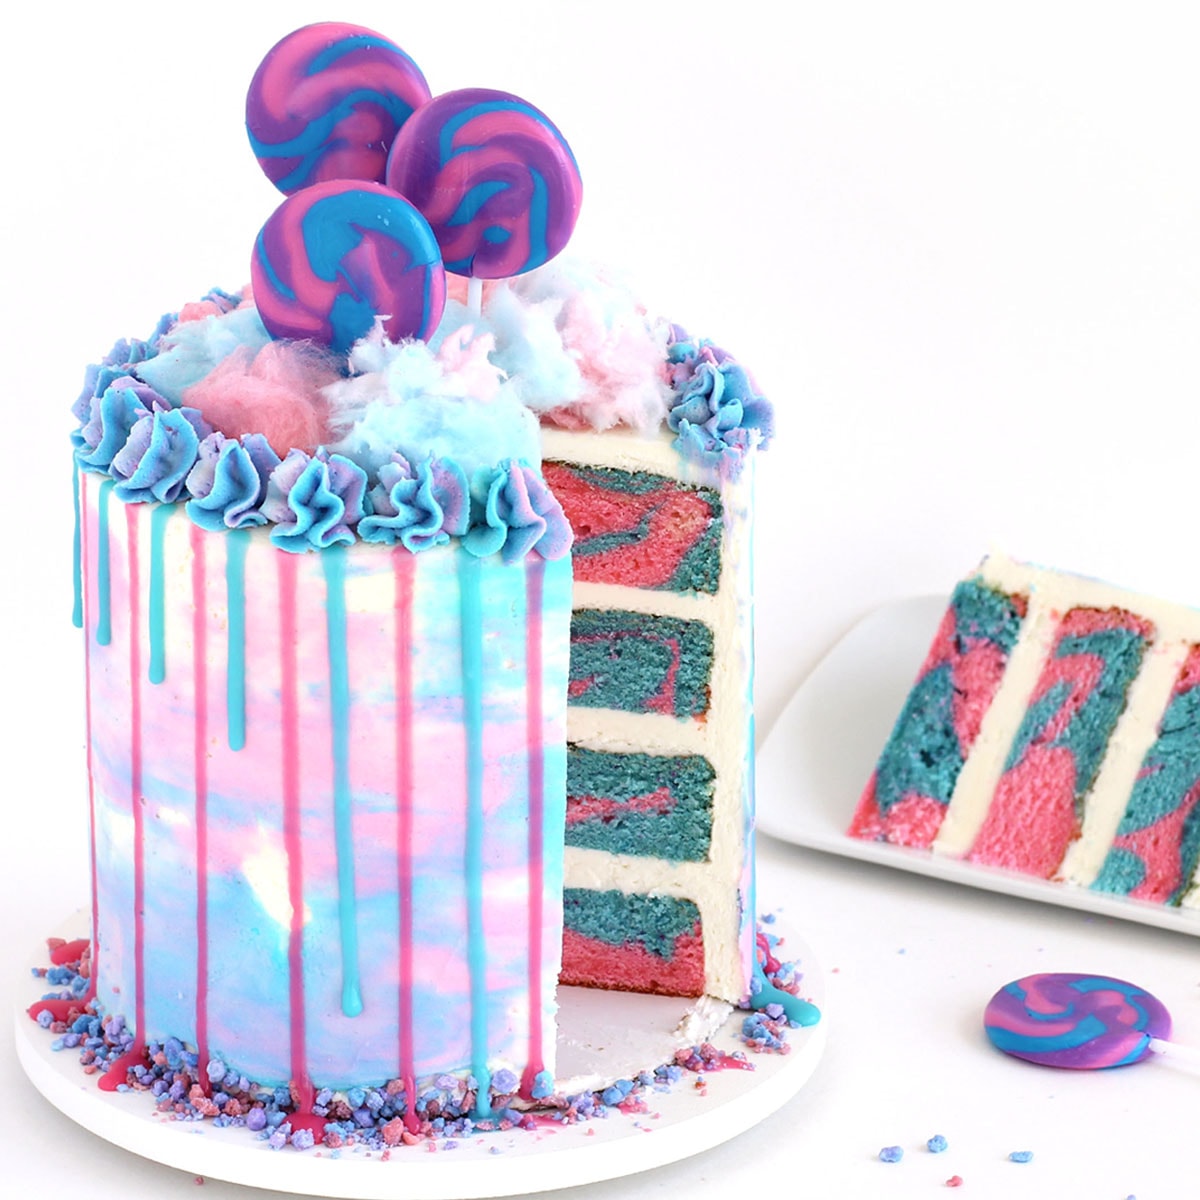 Pink and blue swirled cotton candy layer cake topped with drips of pink and blue ganache and fluffy cotton candy.